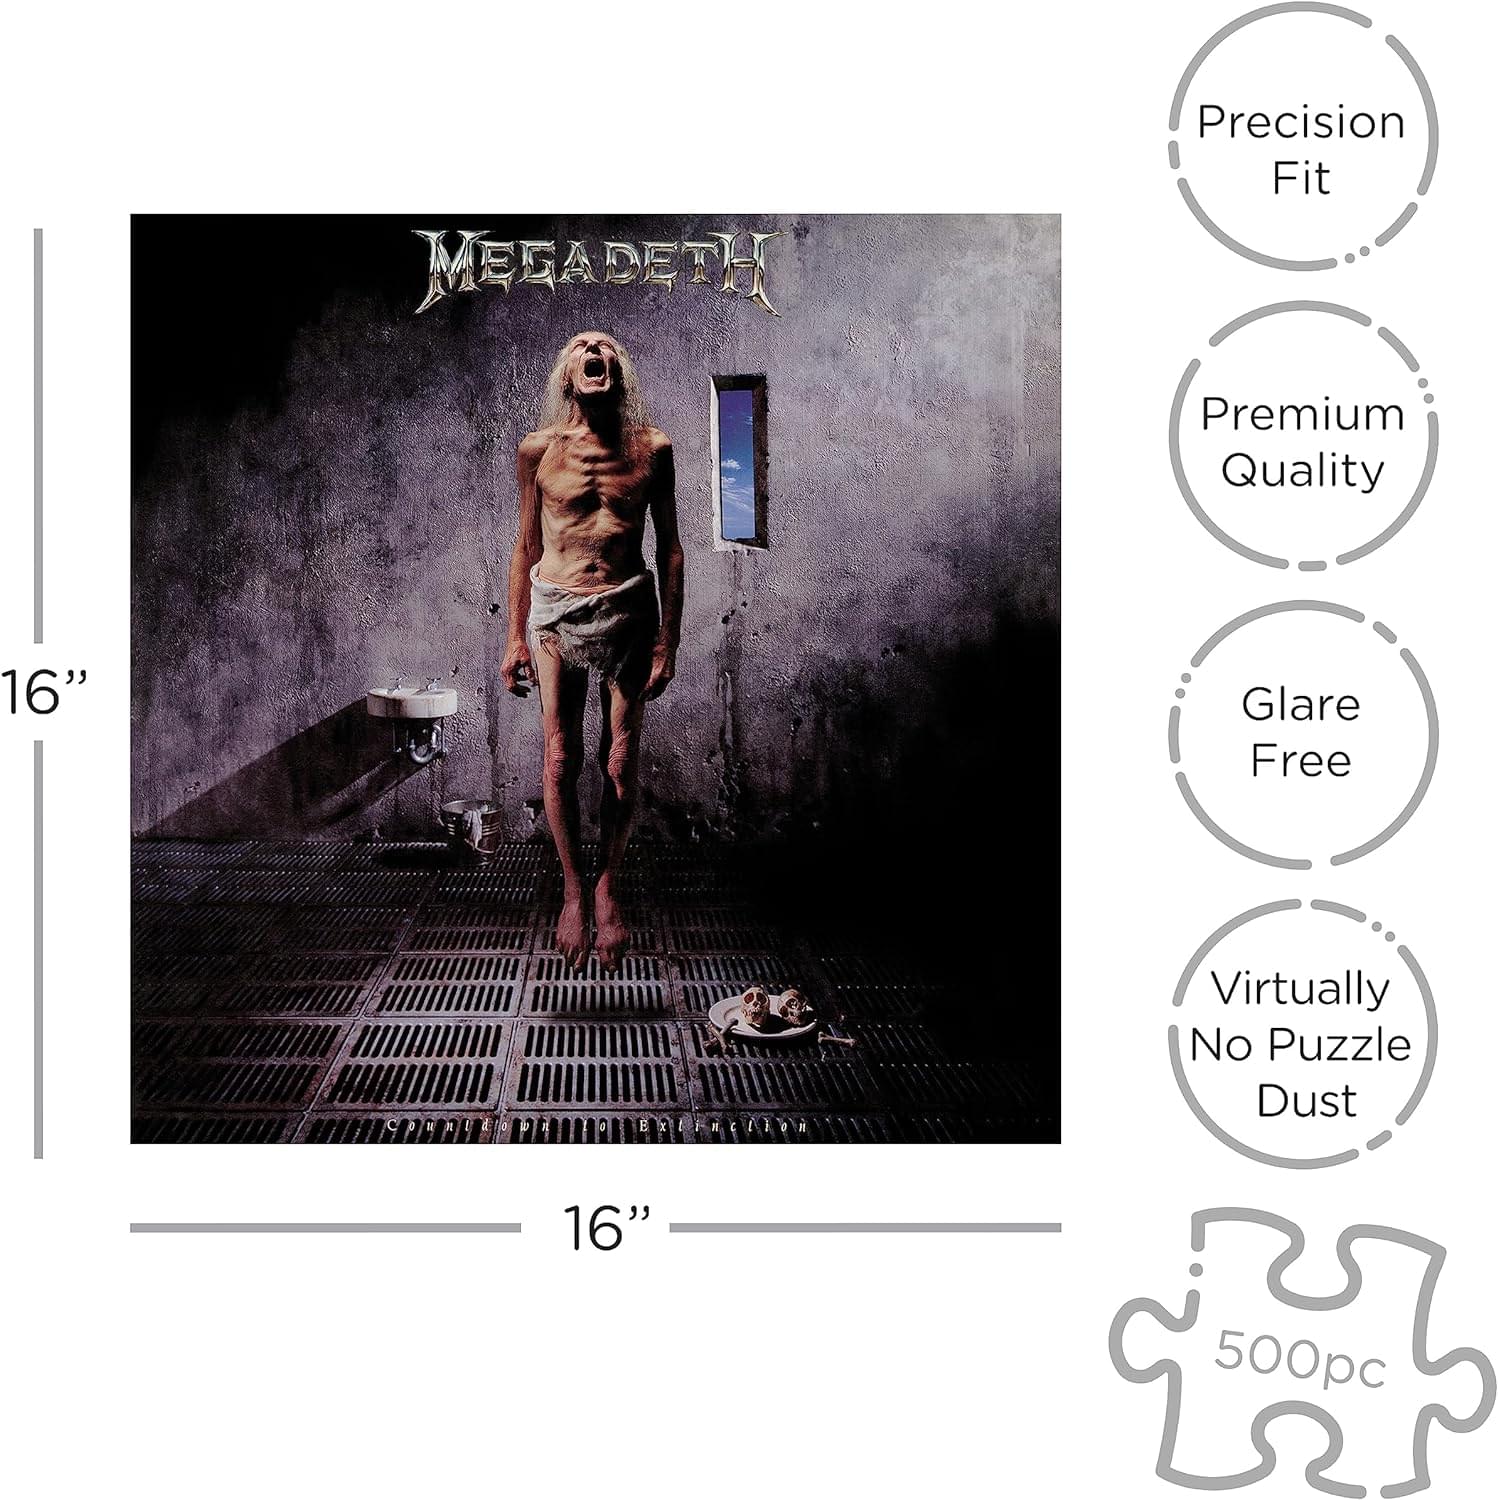 Megadeth Countdown To Extinction 500 Piece Jigsaw Puzzle